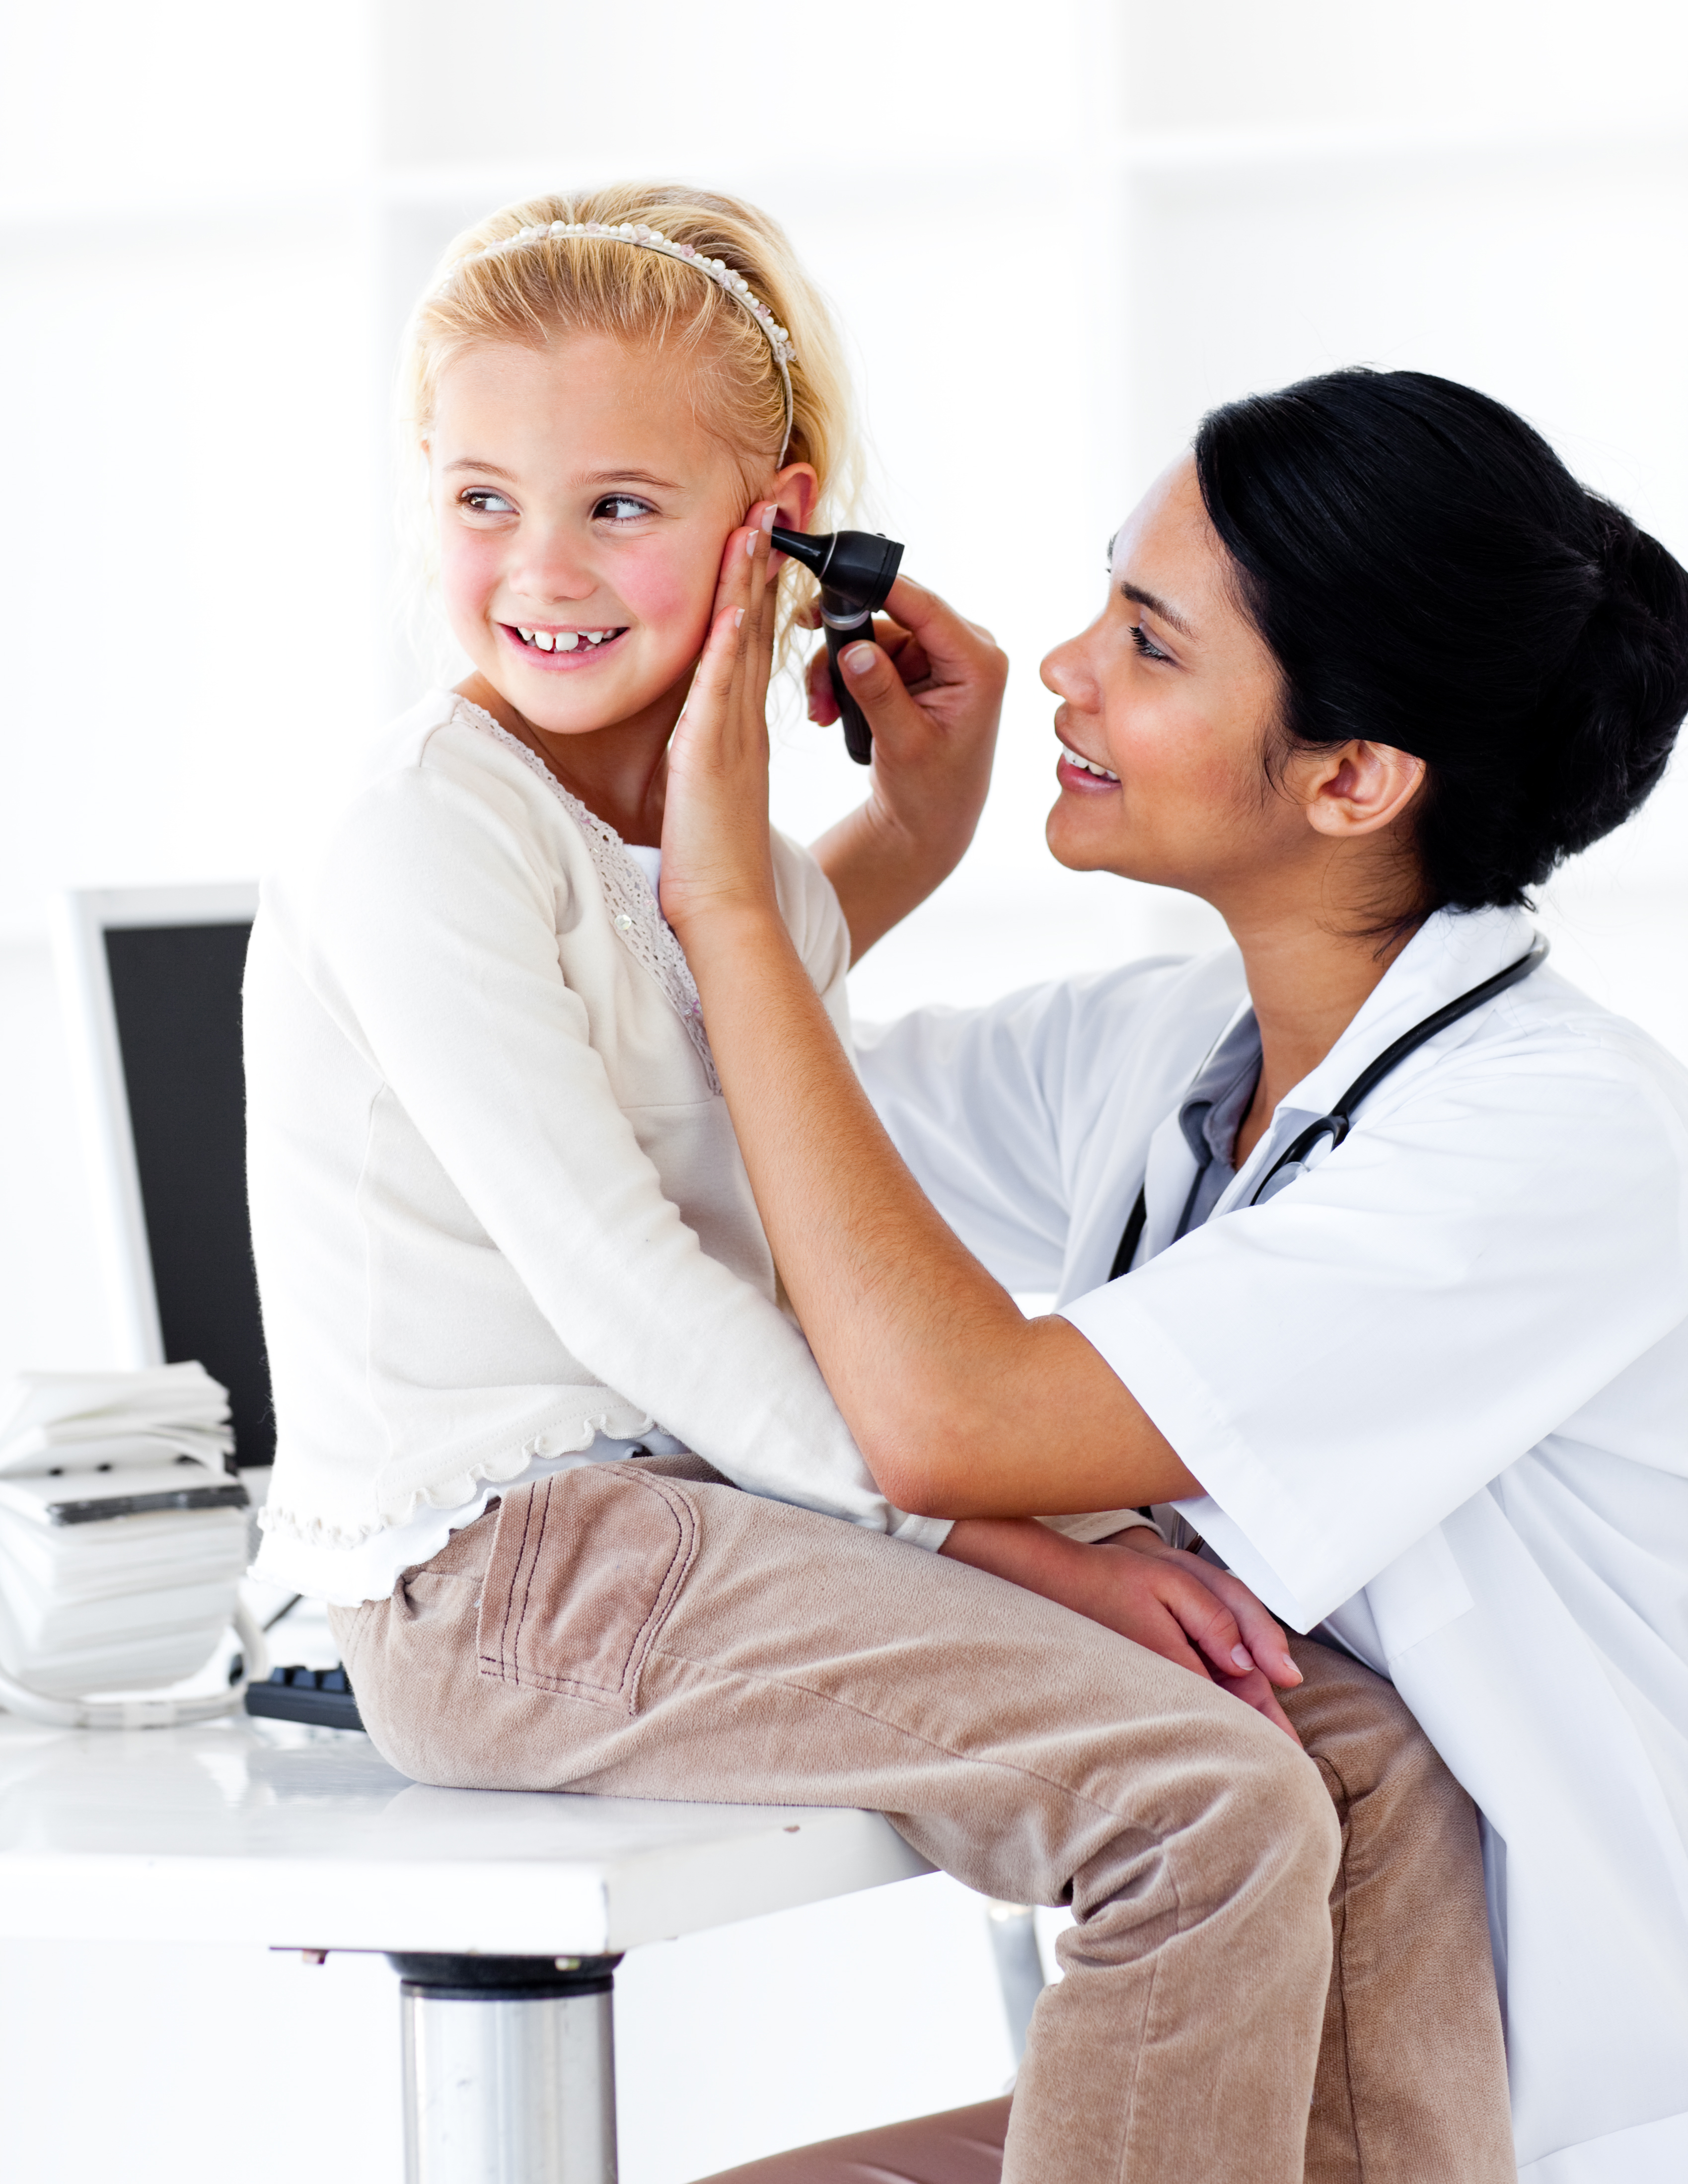 Vitamin D Reduces Ear Infections in Children